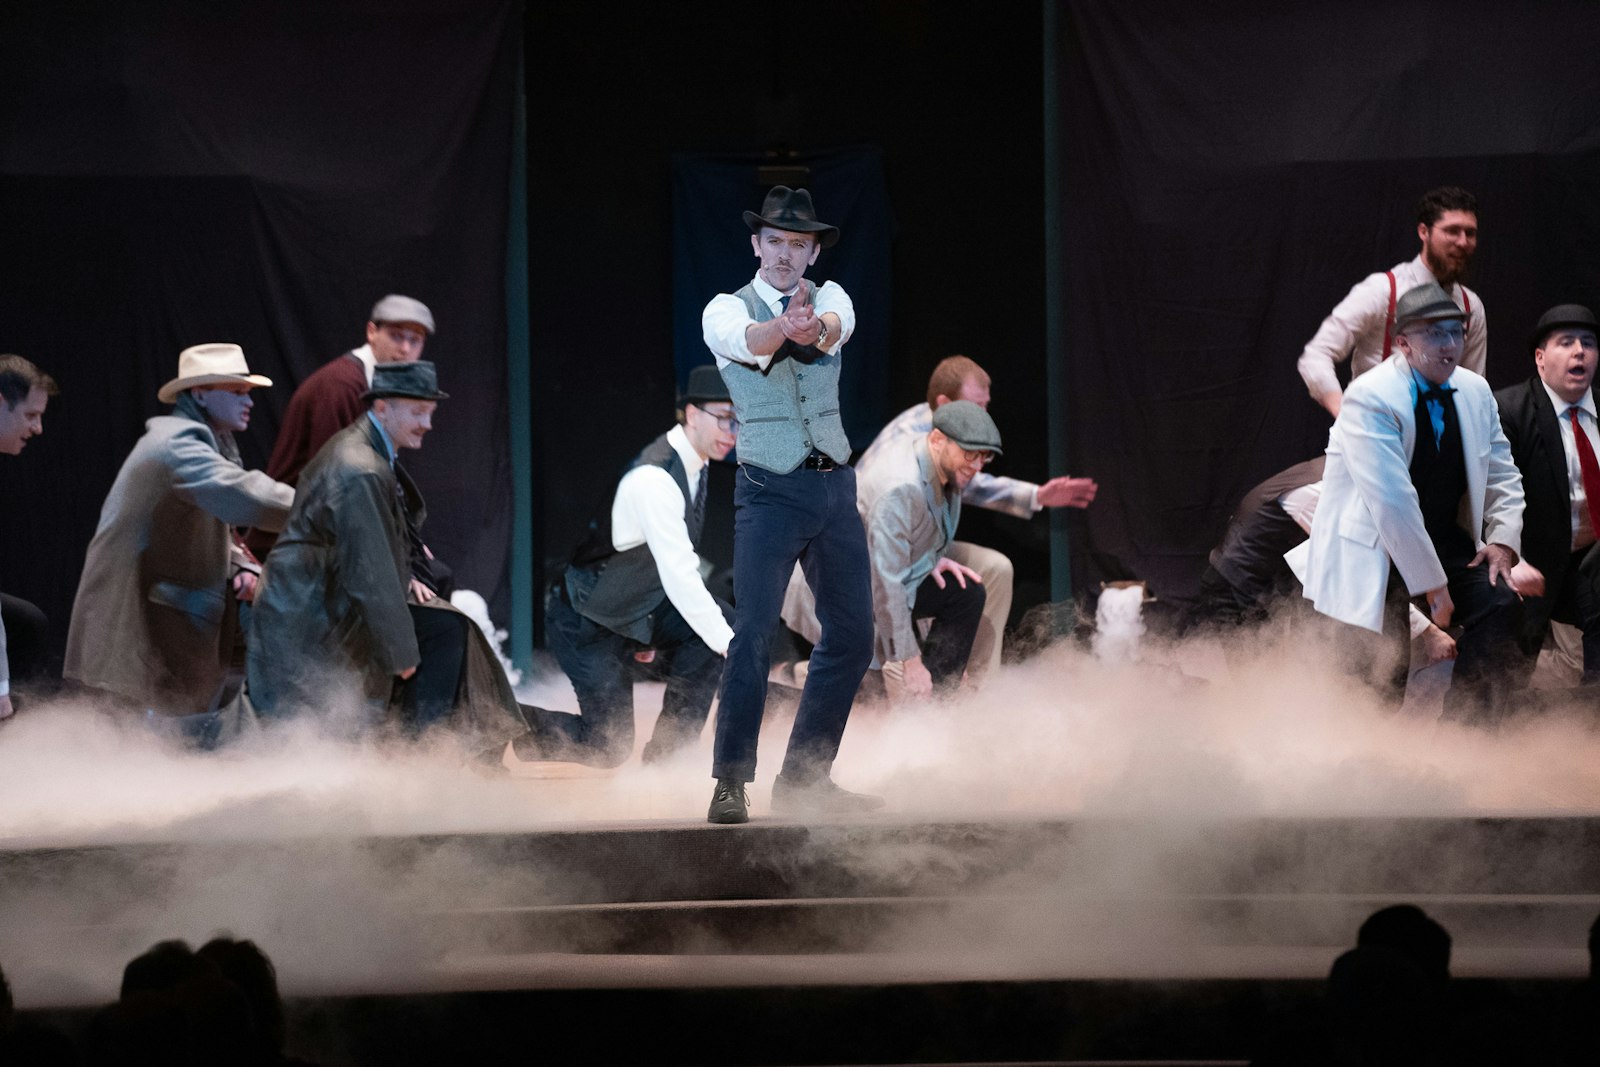 Seminarians' family and friends traveled to Detroit to take in the debut performance, which included top-notch set design and musical numbers.